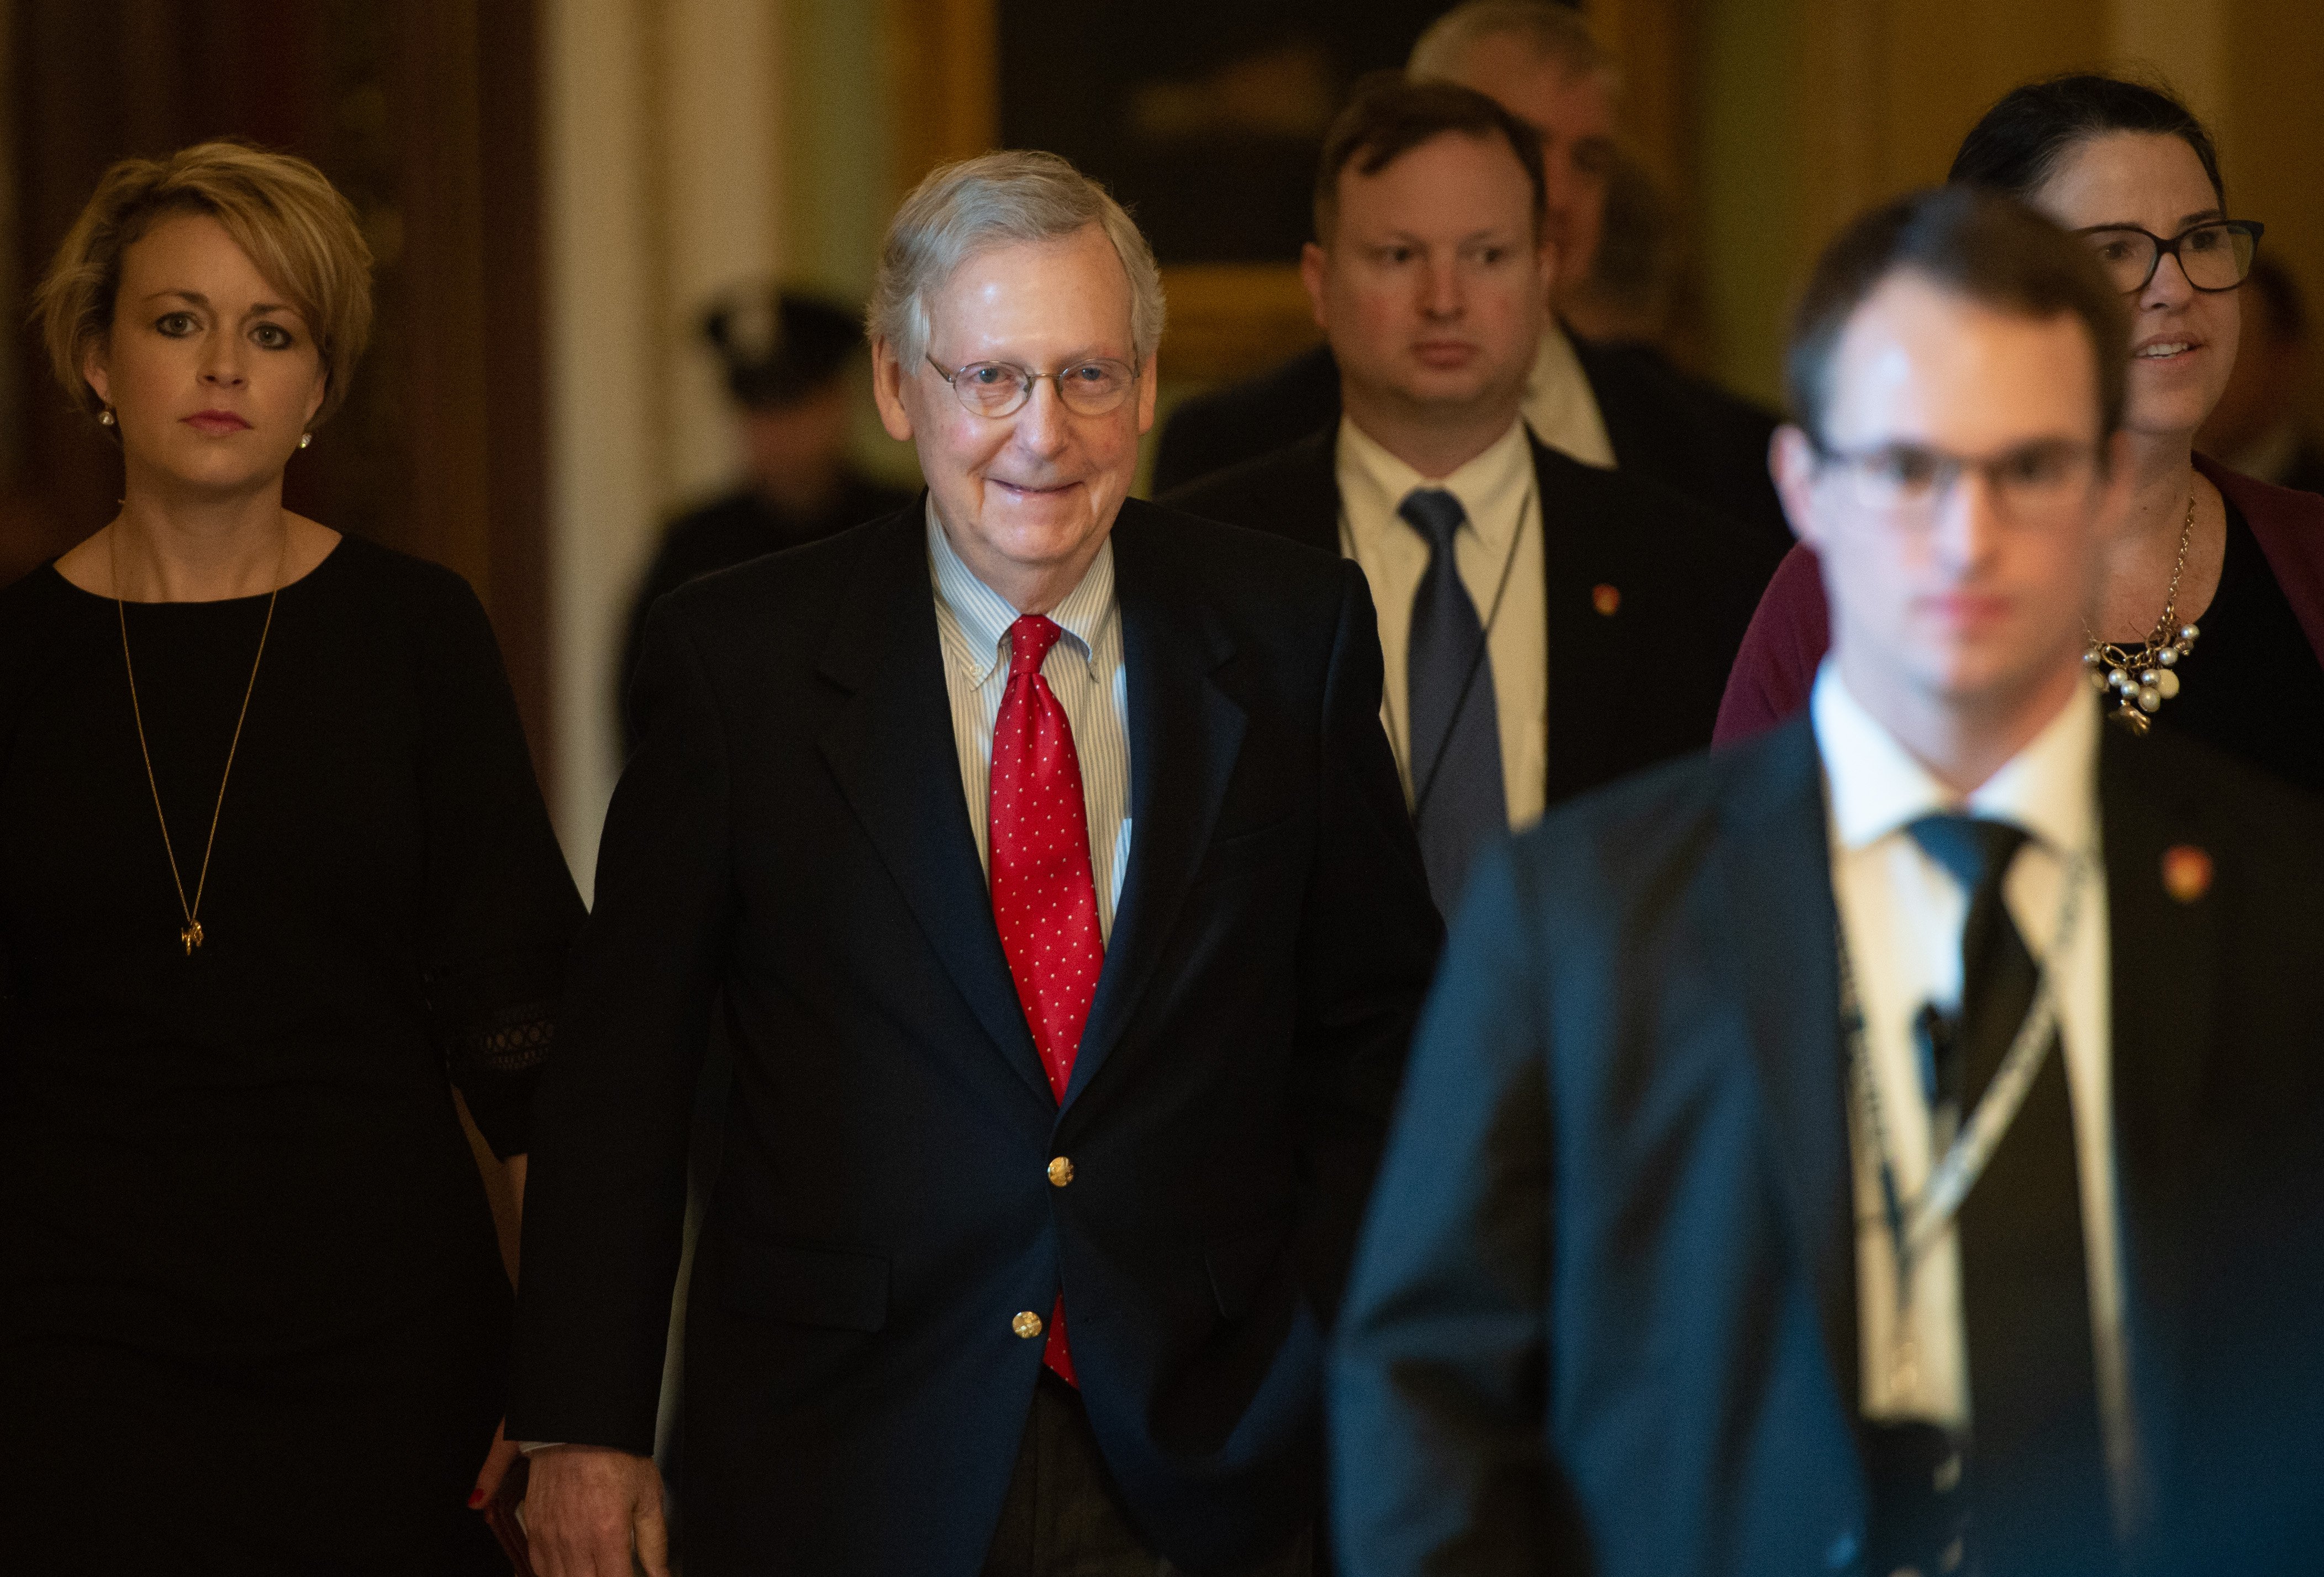 US Senate Majority Leader Mitch McConnell, Republican of Kentucky, walks to his office at the US Capitol in Washington, DC, December 21, 2018. - A US government shutdown appeared more and more likely to become a reality just before Christmas, with President Donald Trump threatening a "very long" federal work stoppage unless Democrats agree to his border wall demands. (Photo by SAUL LOEB/AFP/Getty Images)